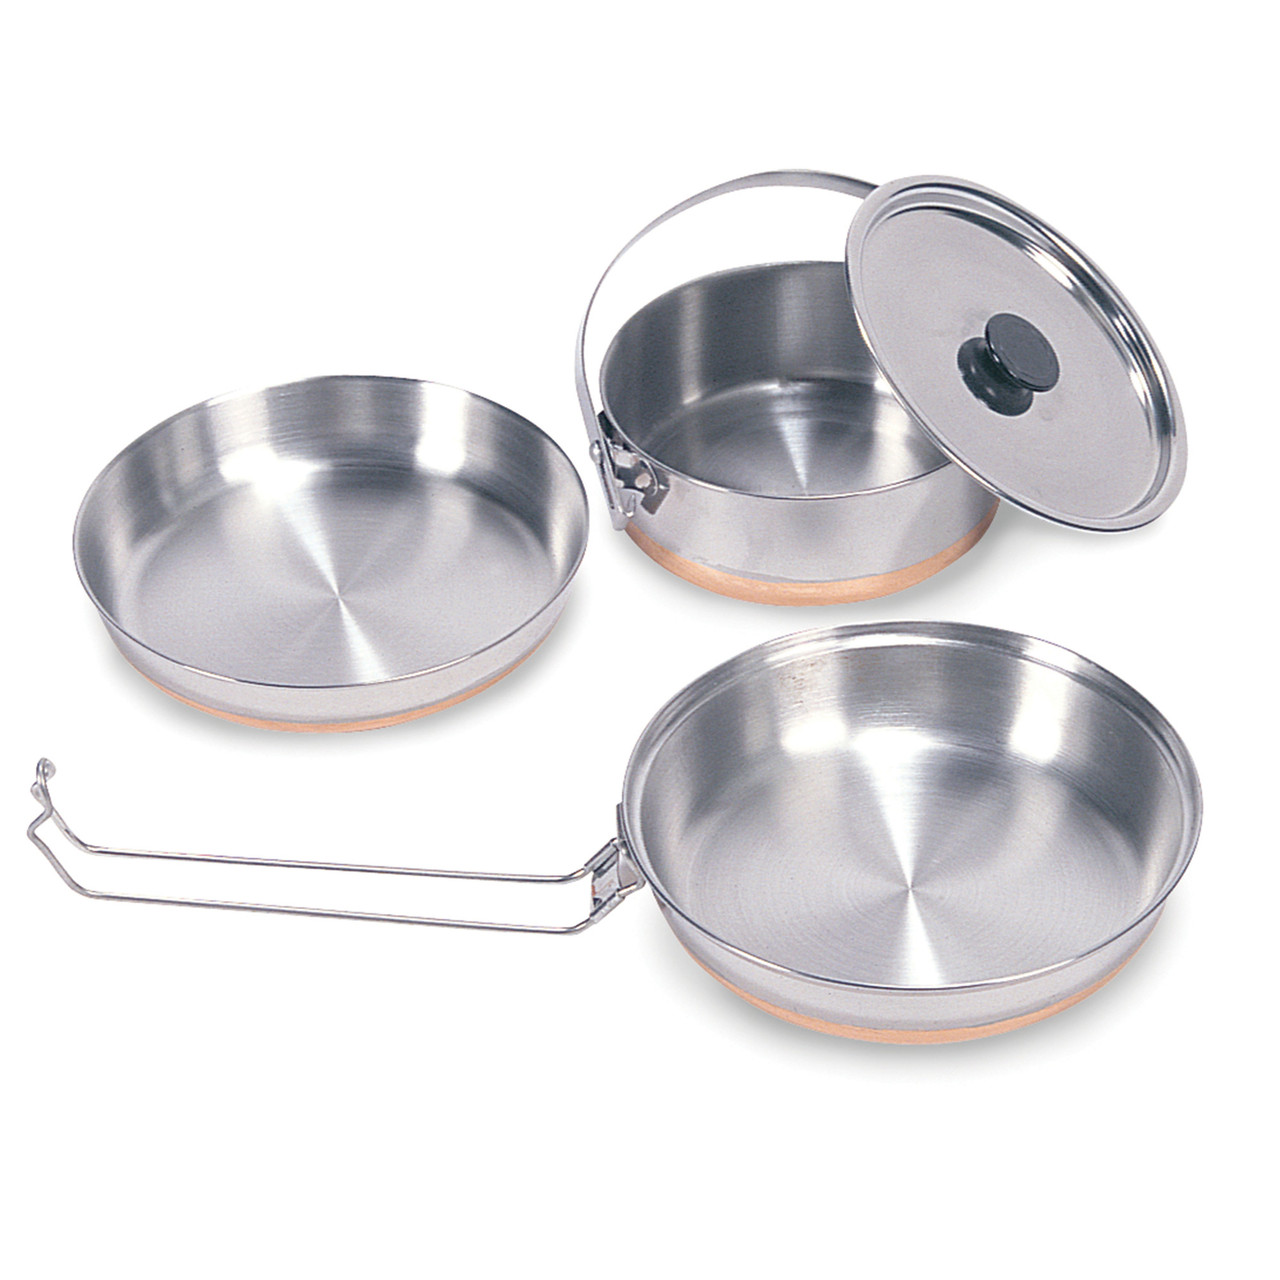 STANSPORT – Stainless Steel Mess Kit for Camping, Backpacking & Outdoors